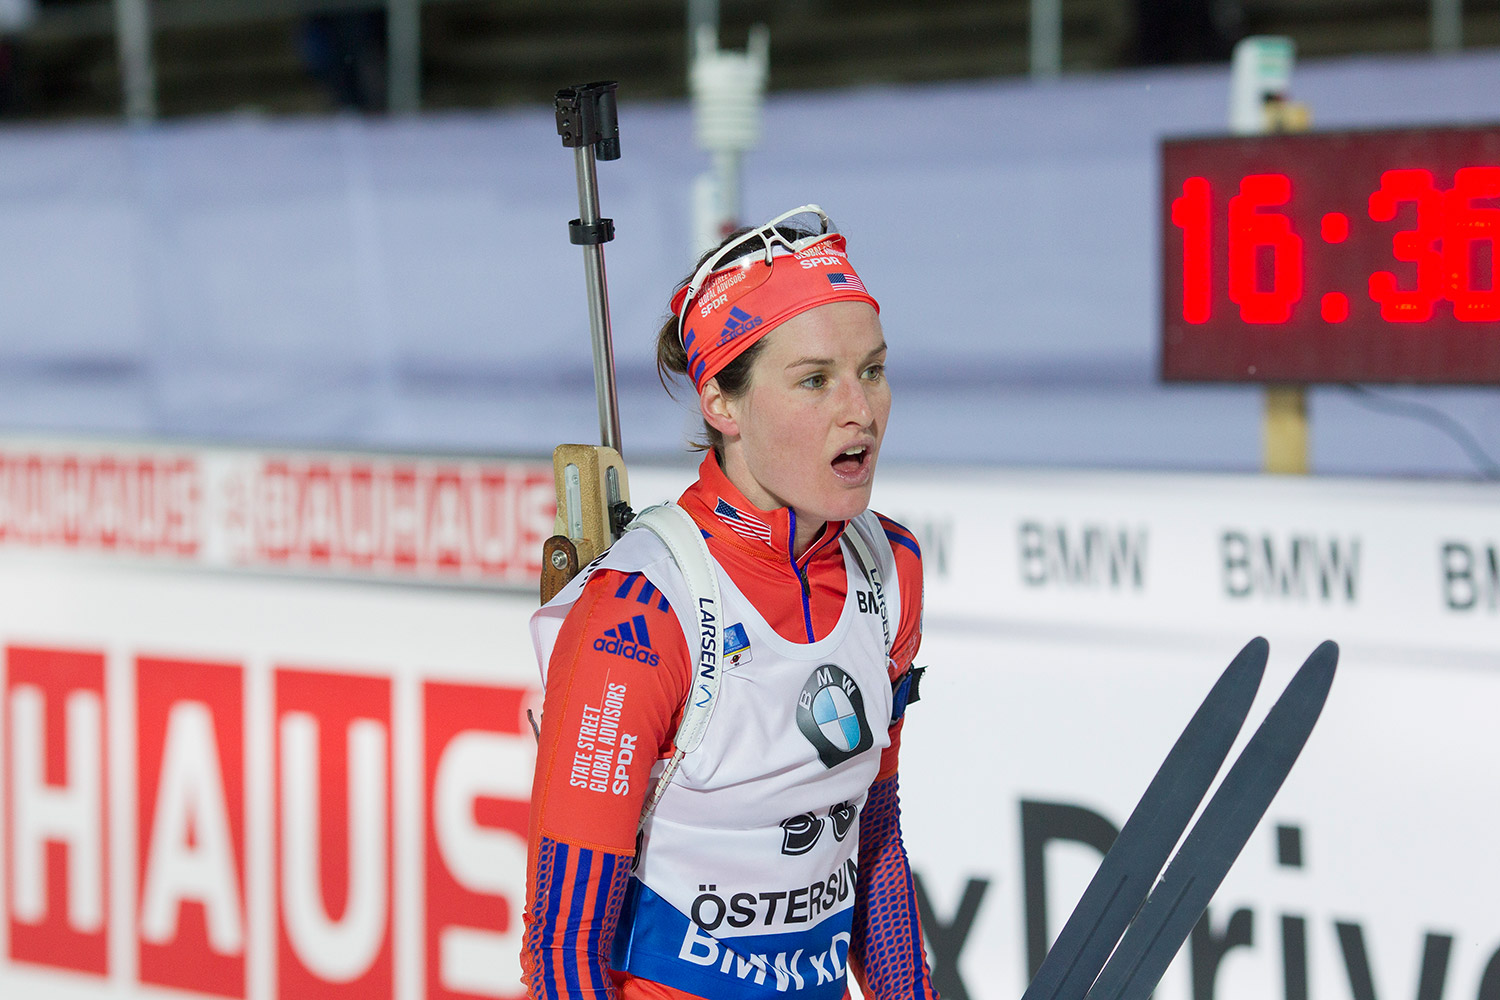 “I think we have barely scratched the surface of what Clare’s abilities are,” says the president and CEO of U.S. Biathlon. “We need to have her training at the national level for three or four years before we see what she can do." Manzoni/NordicFocus